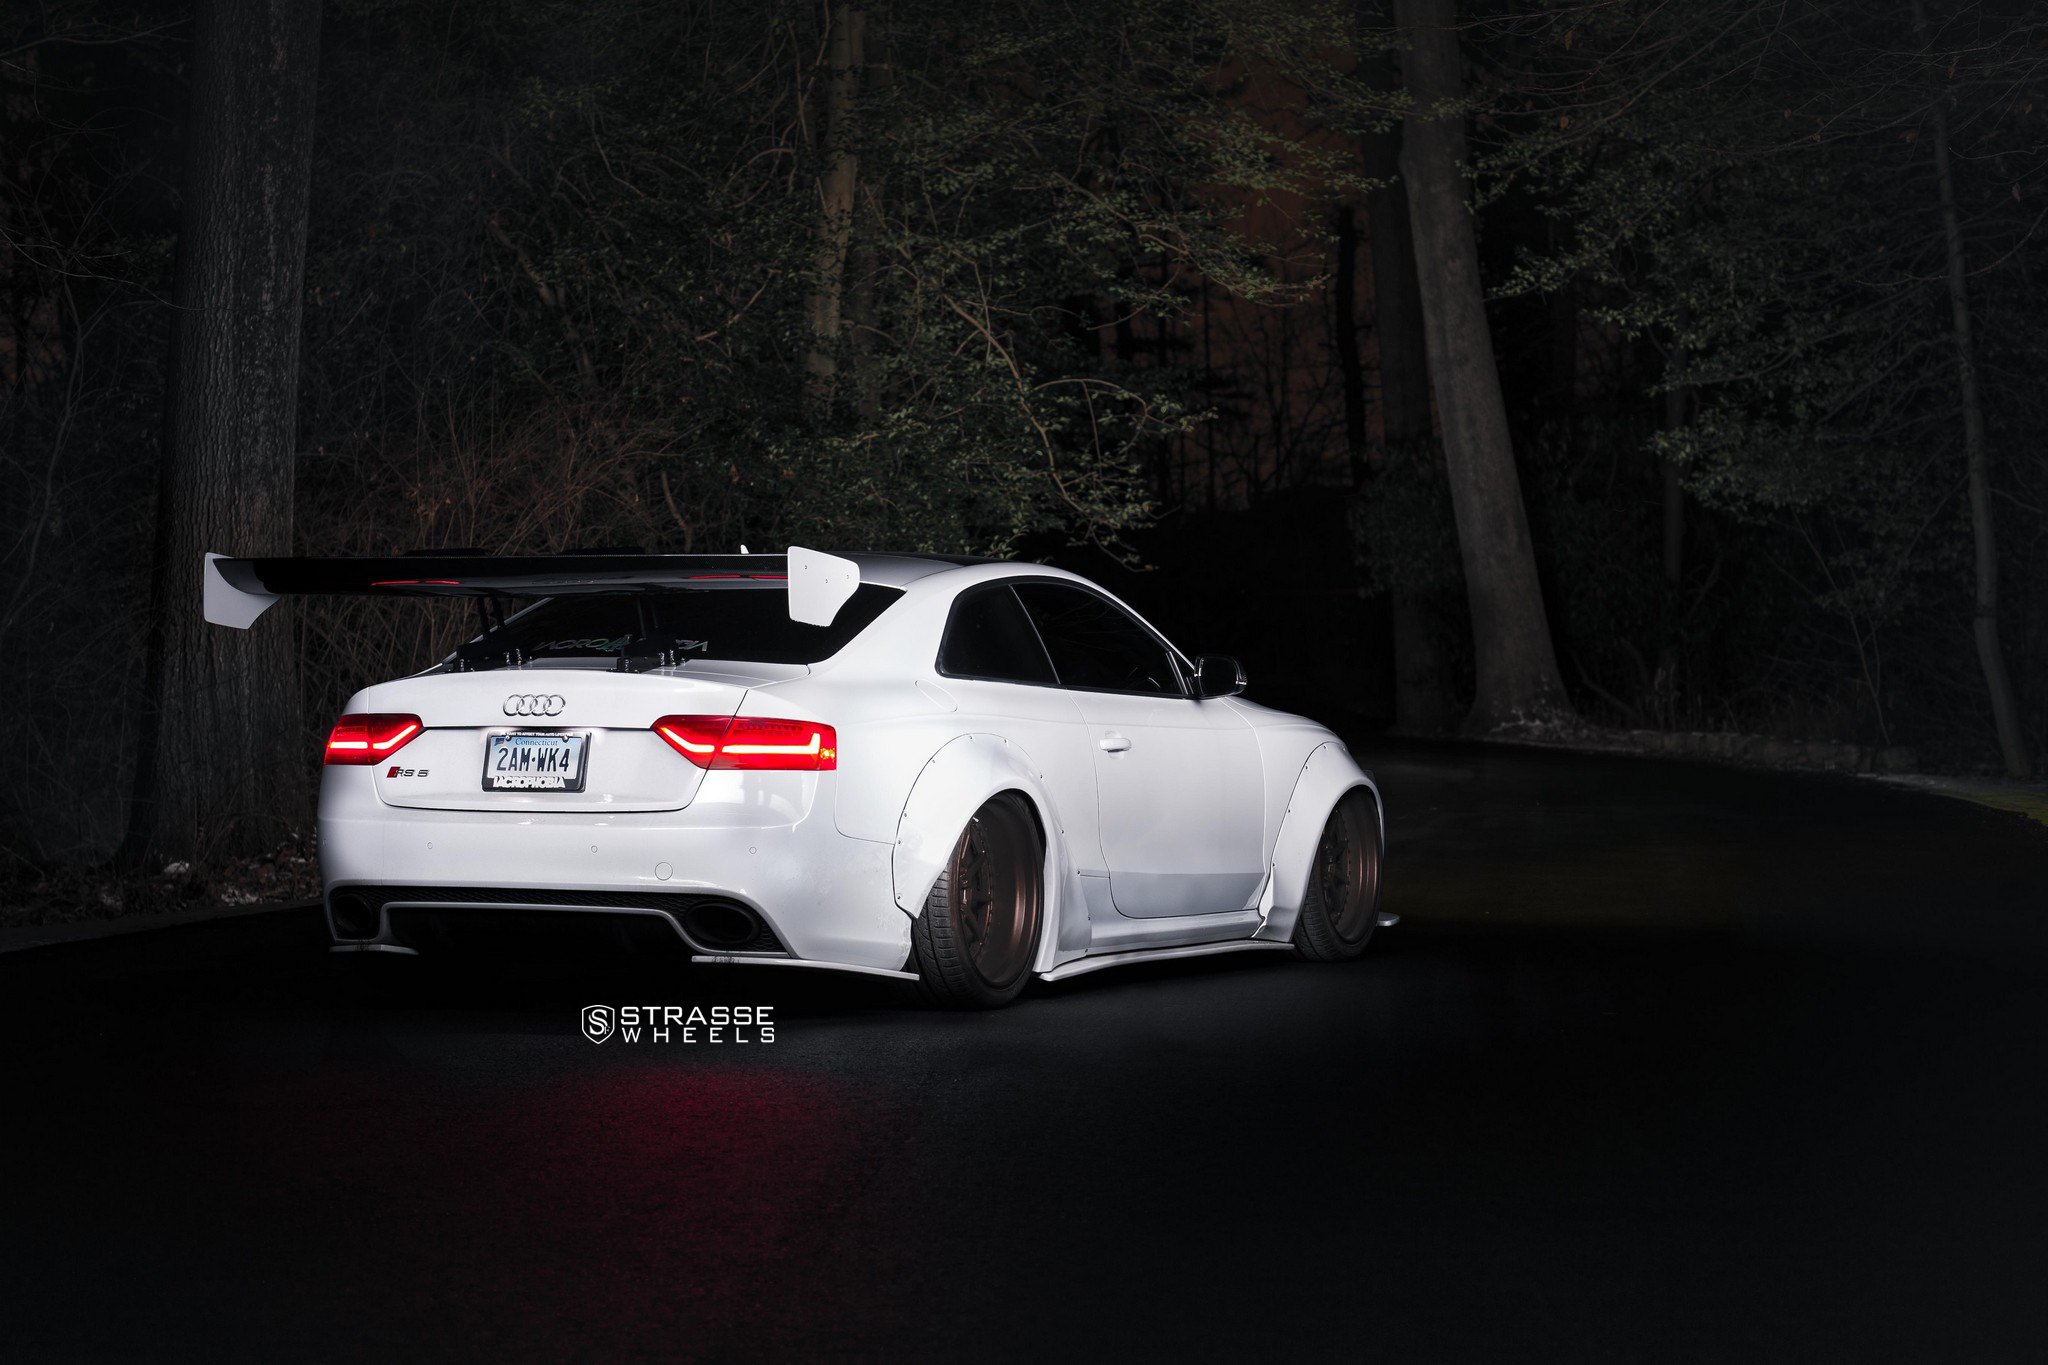 White Audi S5 Gains a Racer Look with Huge Spoiler and Wide Body Kit.